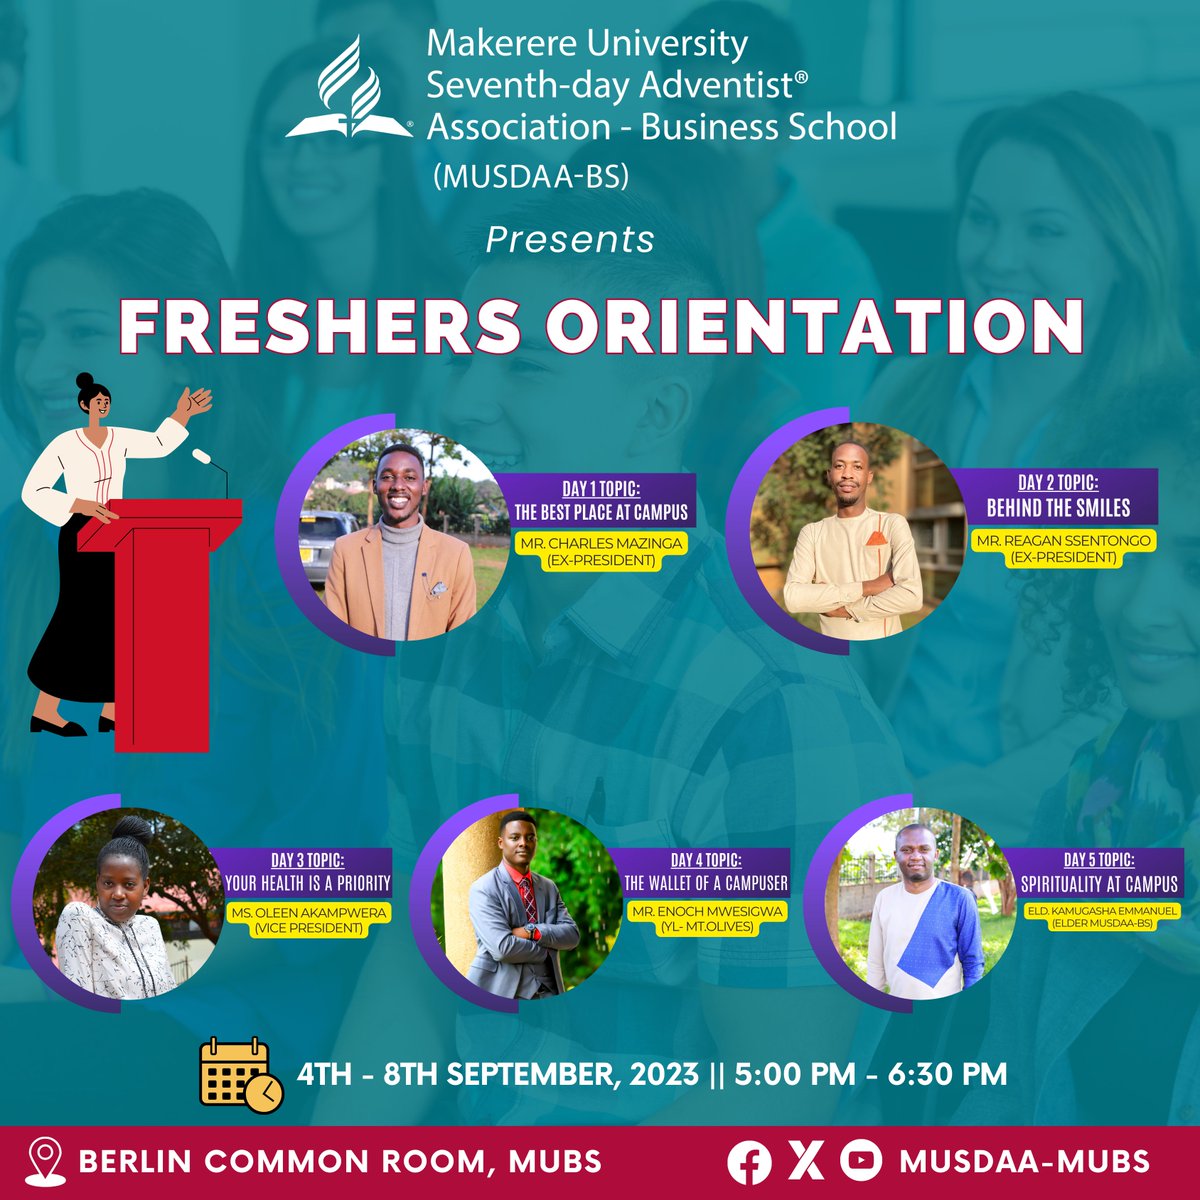 Join us this week for the Freshers' Orientation at the Berlin Common Room, MUBS. Every evening from 5:00 pm to 6:30 pm

#MusdaaBs #1styear #OrientationWeek